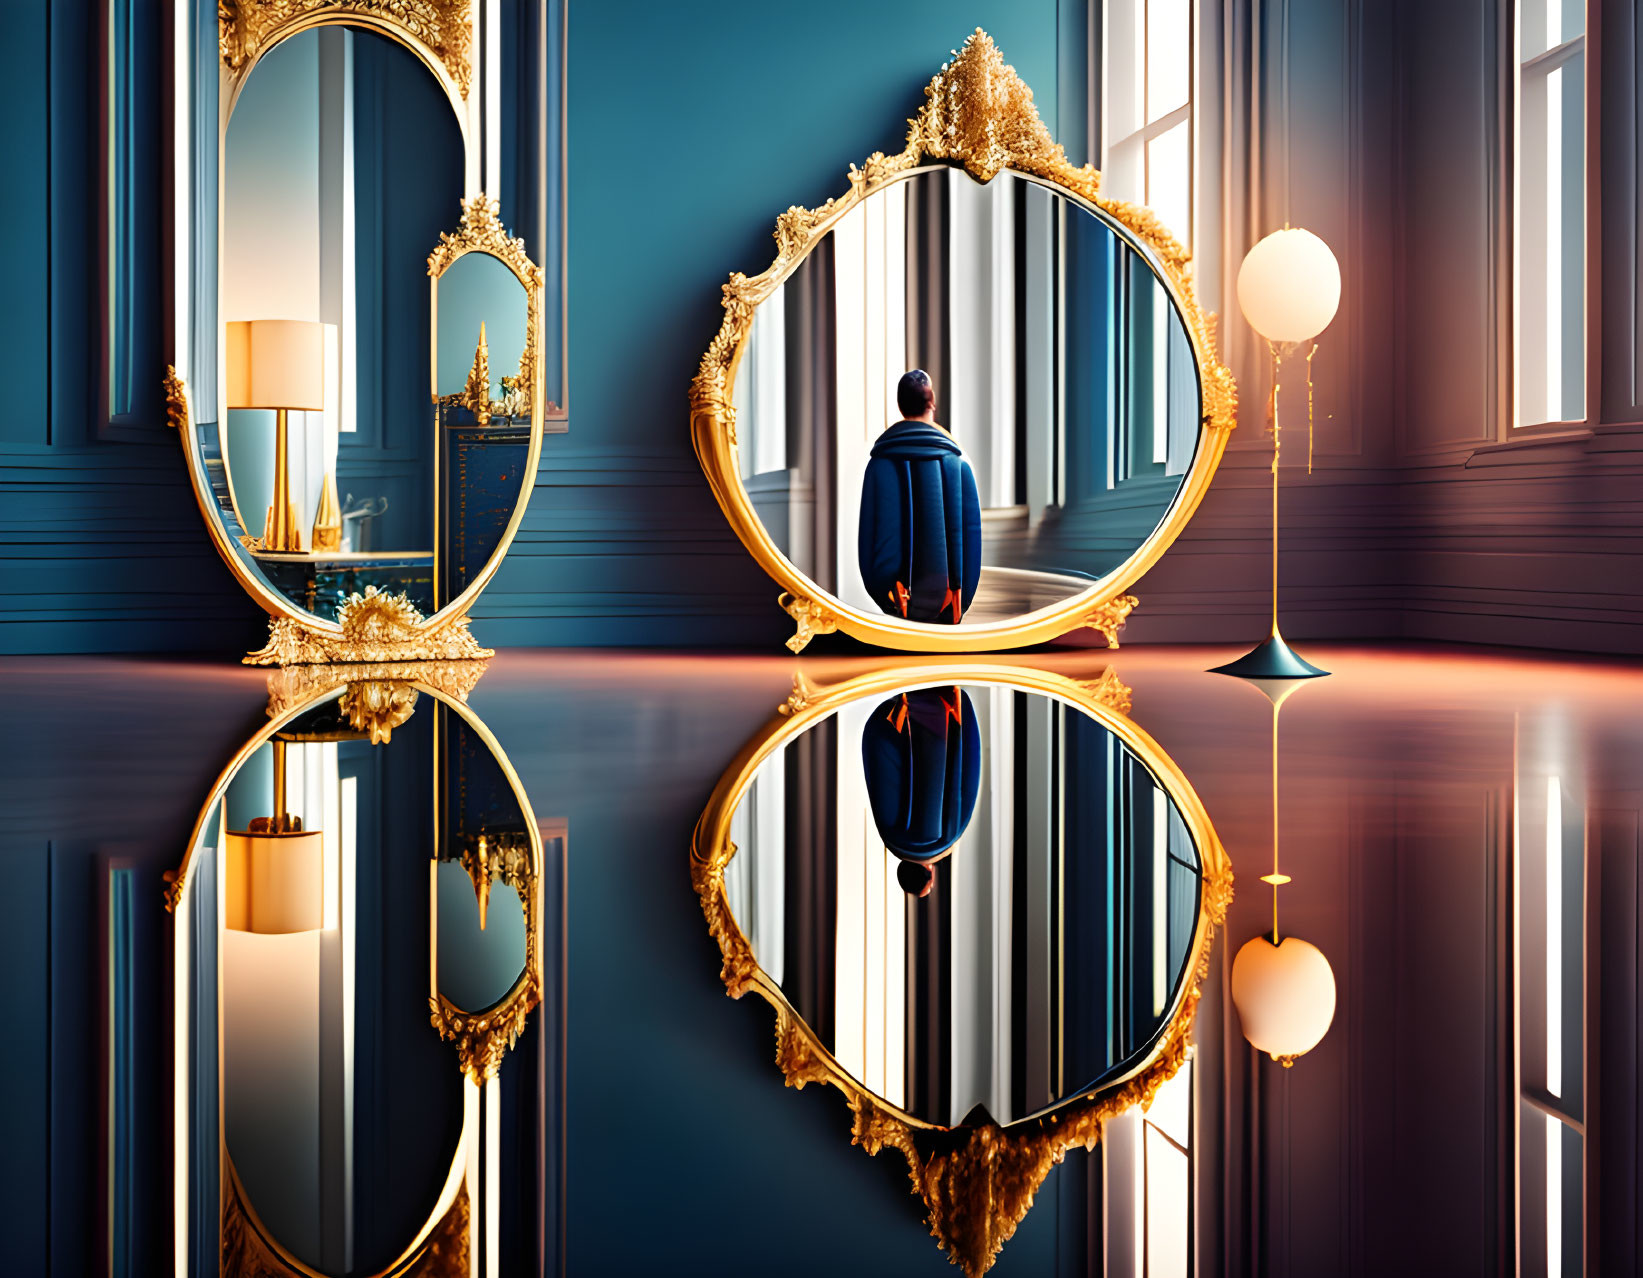 Person in Blue Coat Standing in Front of Ornate Golden Mirrors in Glossy Room